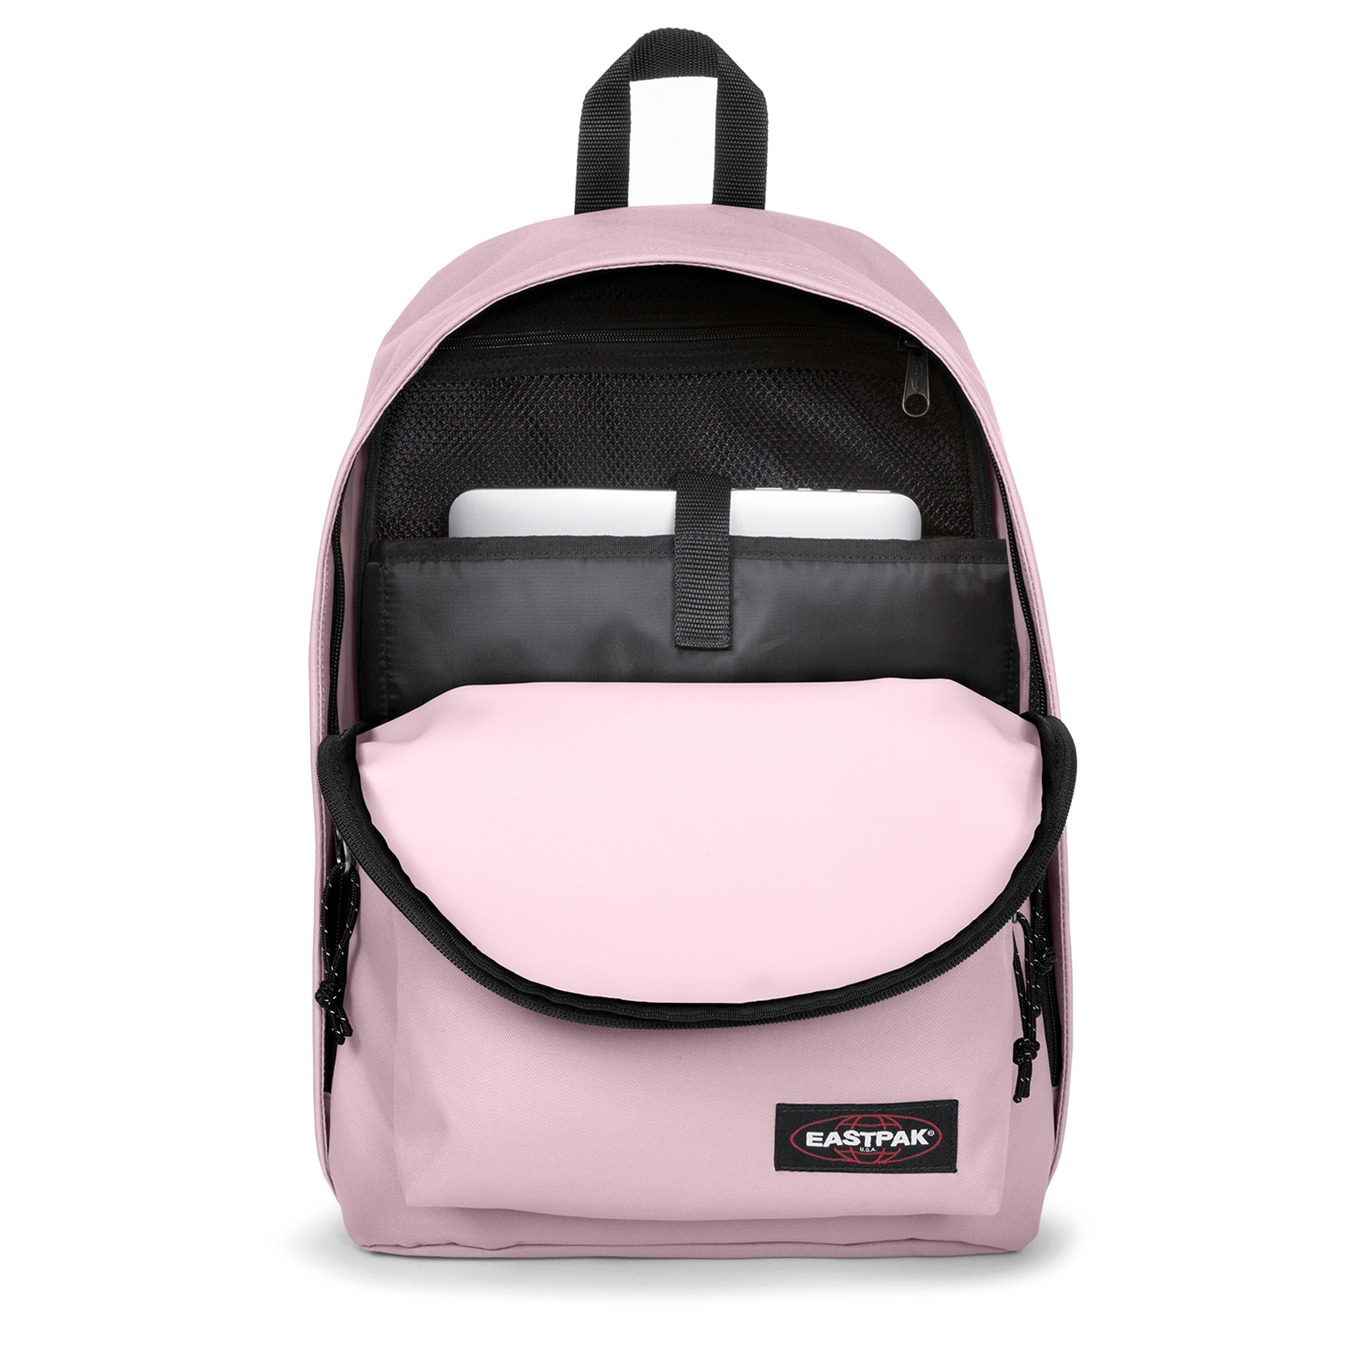 compileren Harnas Onbemand Eastpak Out Of Office pale pink | Travelbags.nl